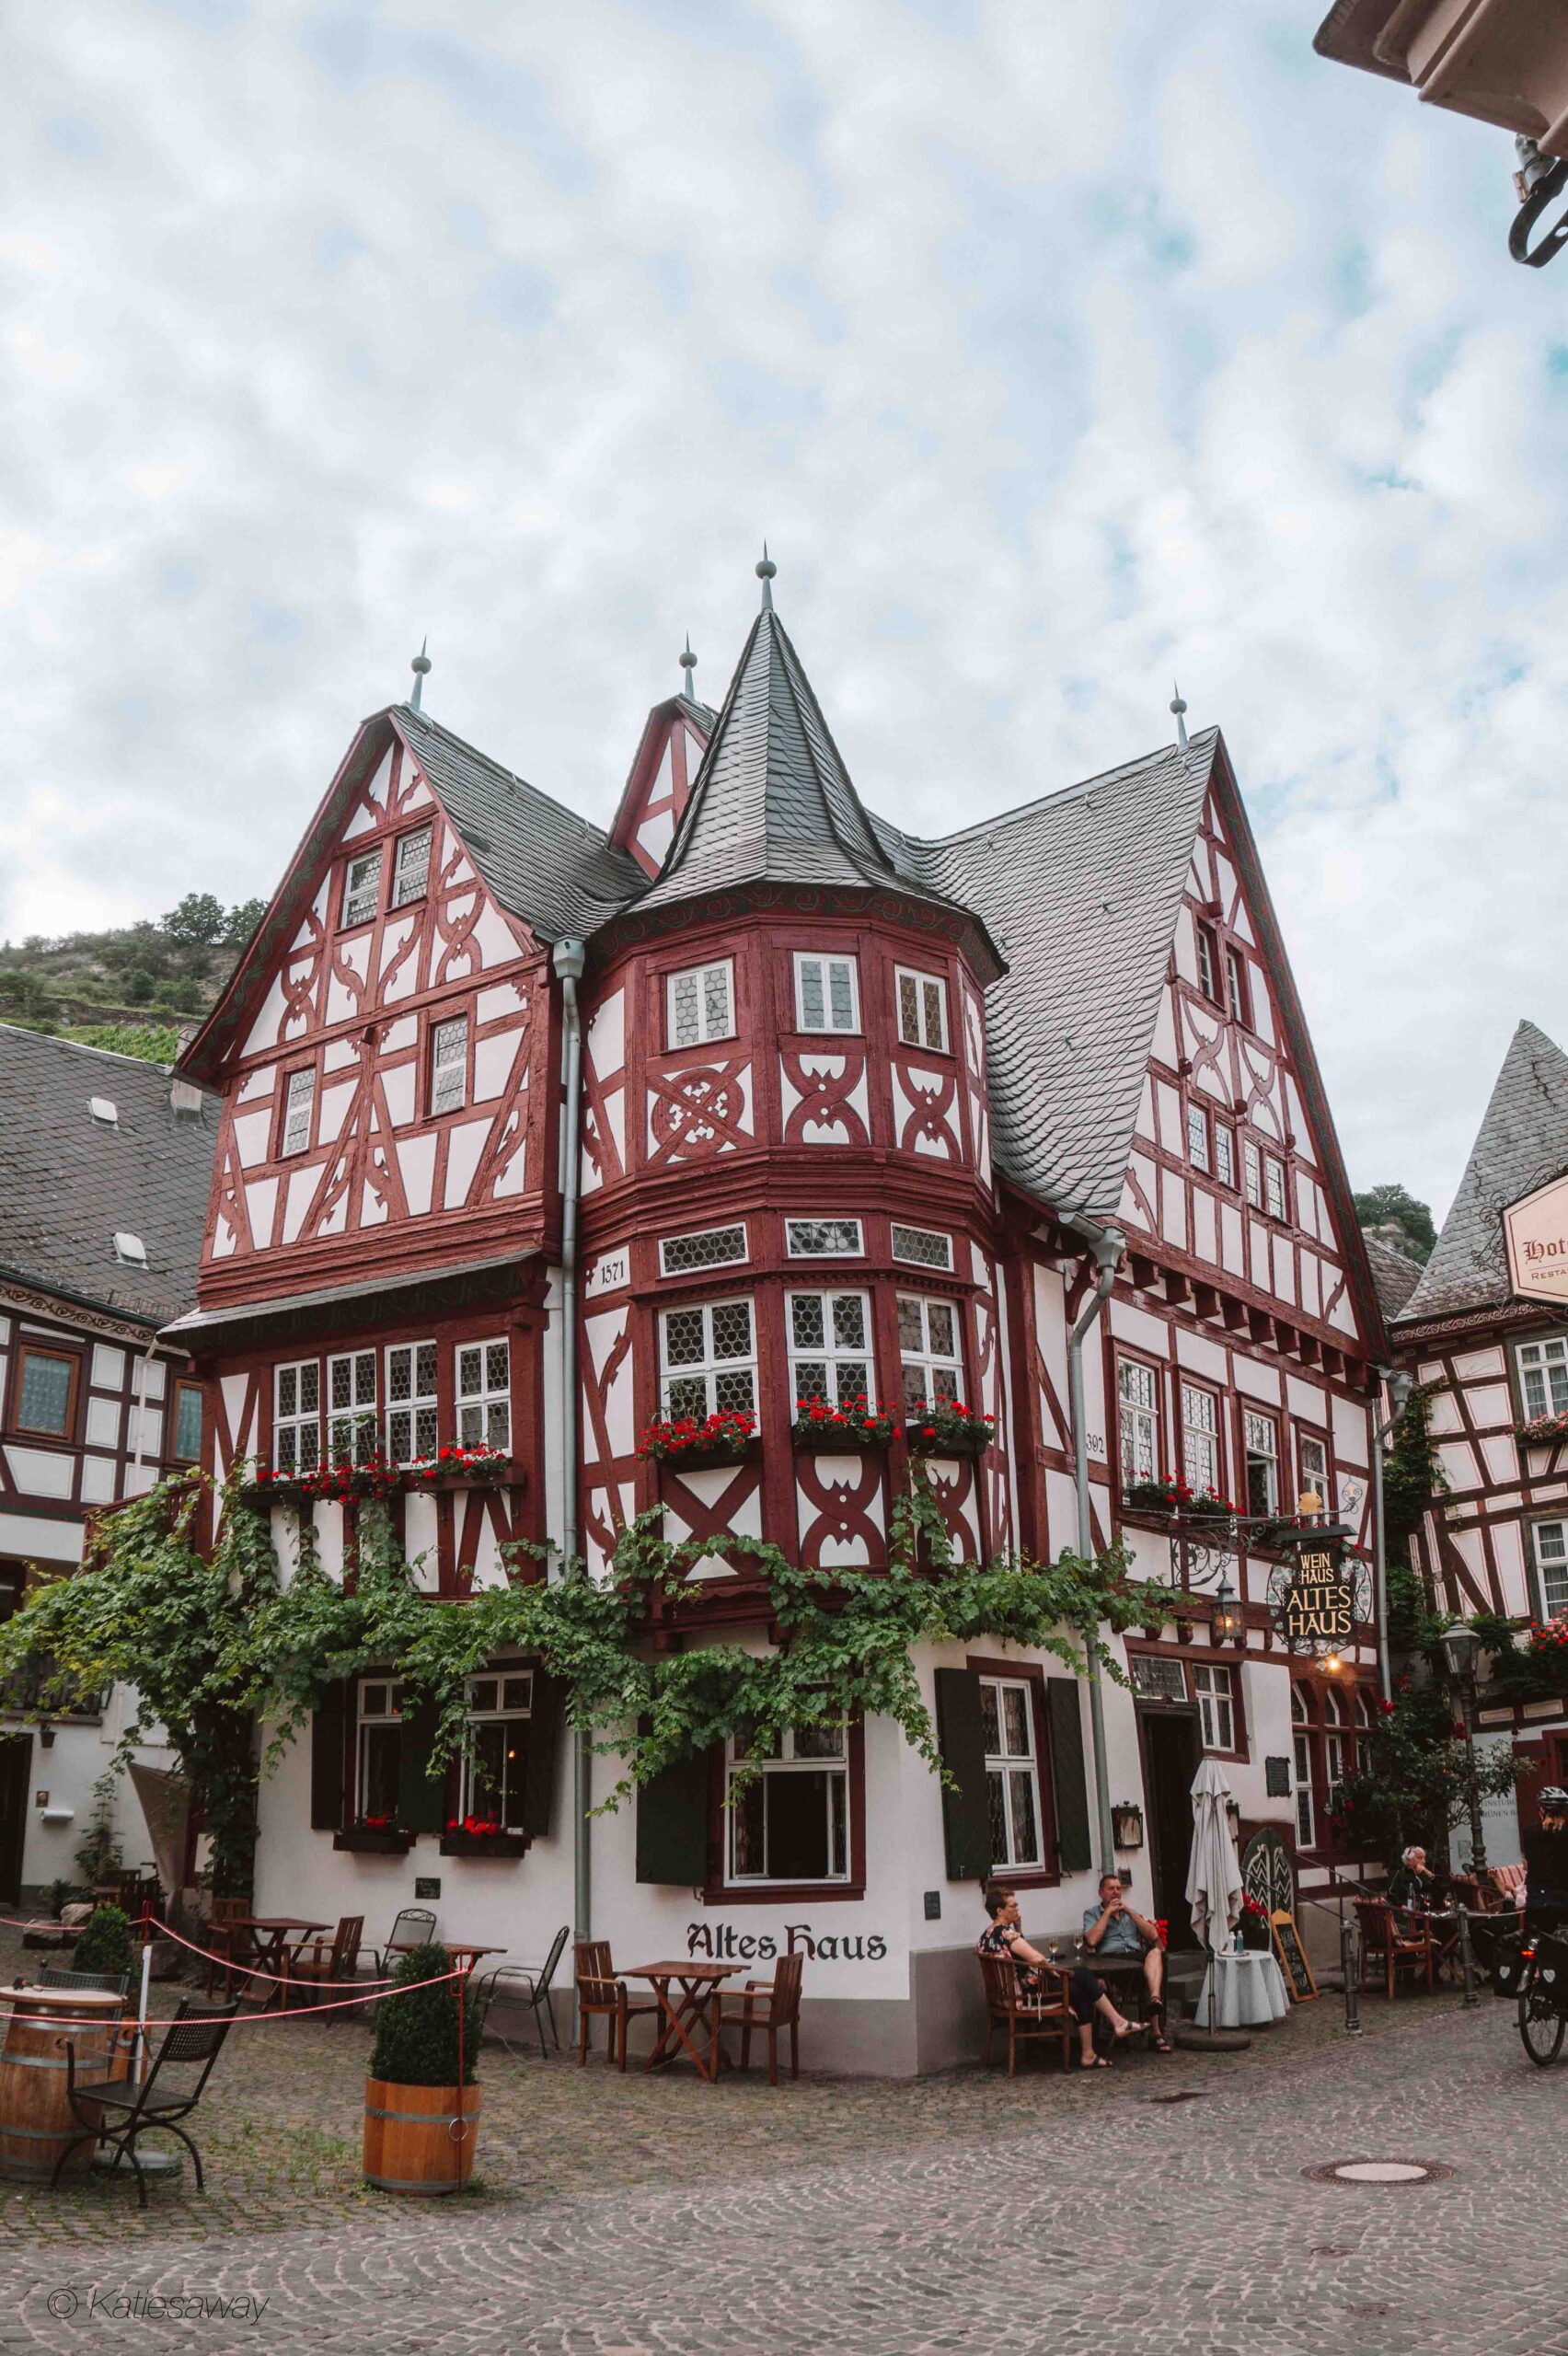 Altes Haus, Bacharach, germany